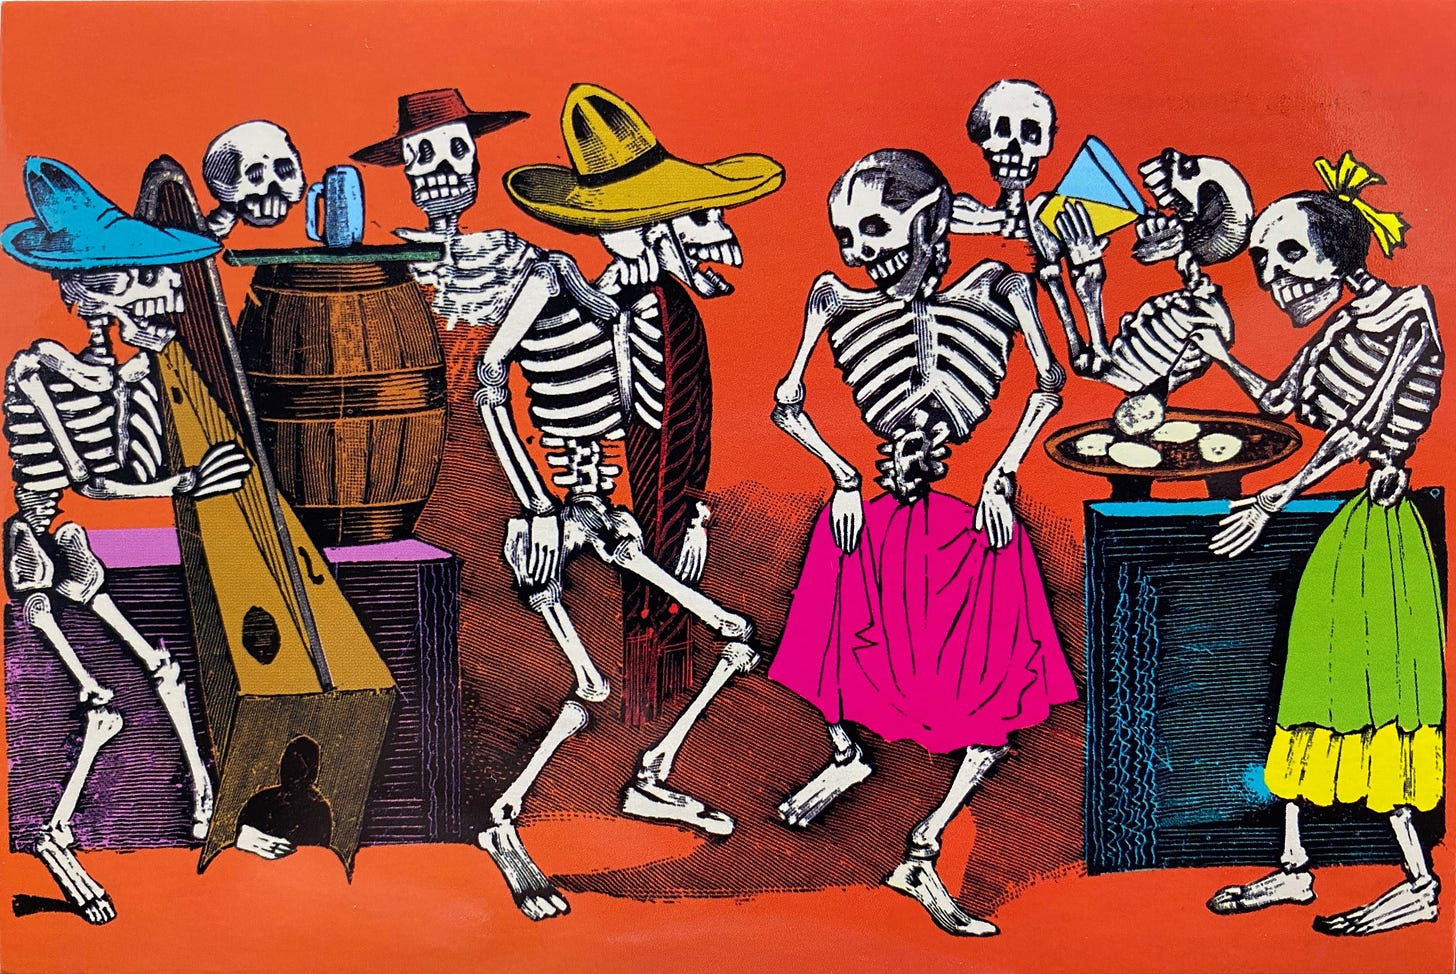 In the forefront, two skeletons, one with a sombrero, another one with a pink skirt, facing each other, dancing. Around them, a skeleton playing Mexican harp, another one cooking tortillas in a comal, other just drinking in the background.